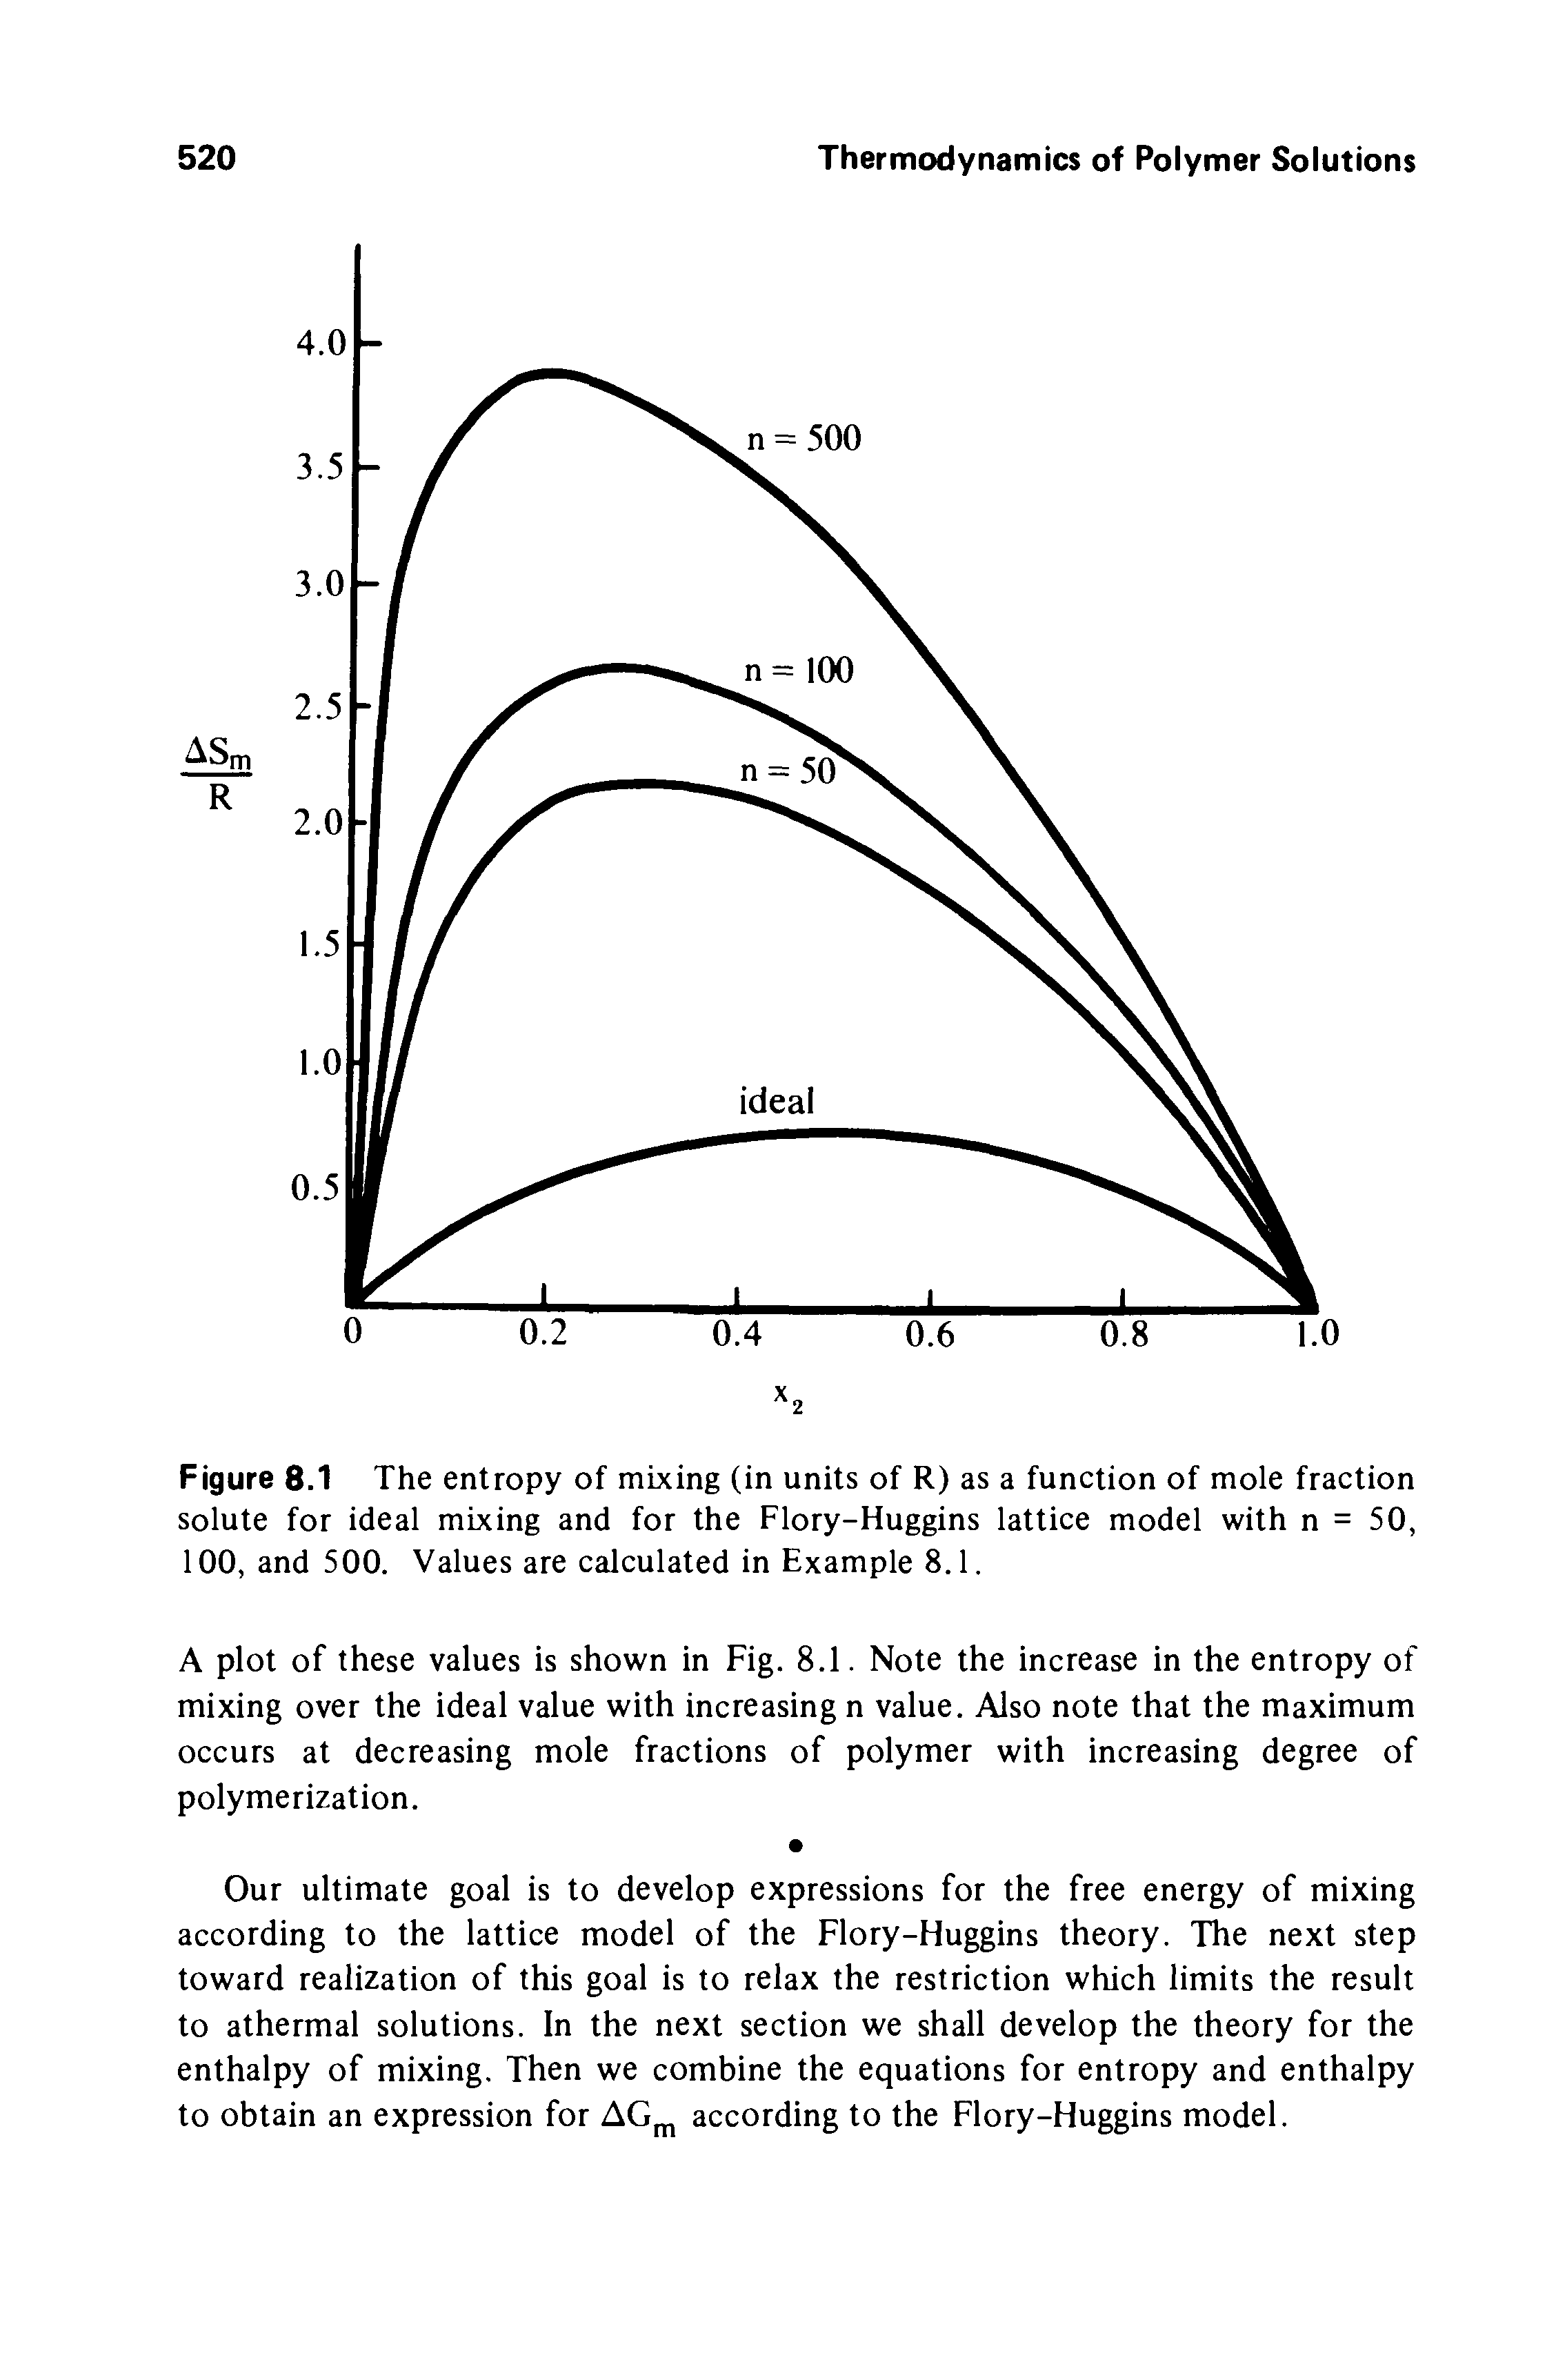 Figure 8.1 The entropy of mixing (in units of R) as a function of mole fraction solute for ideal mixing and for the Flory-Huggins lattice model with n = 50, 100, and 500. Values are calculated in Example 8.1.